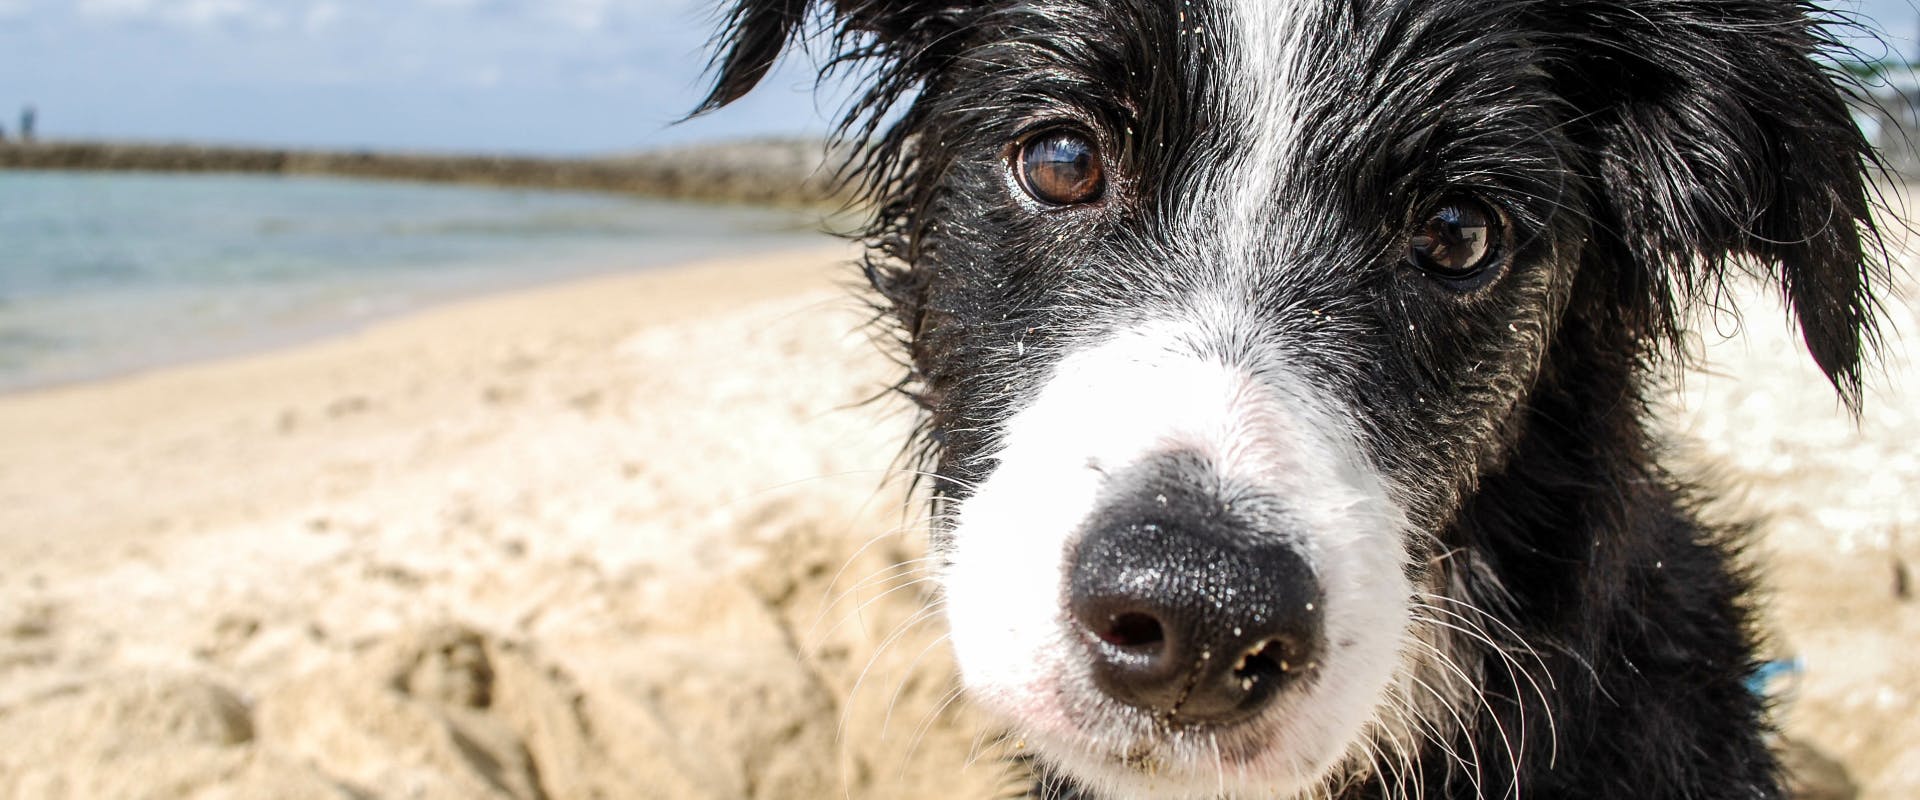 A close up of a dog at the beach.